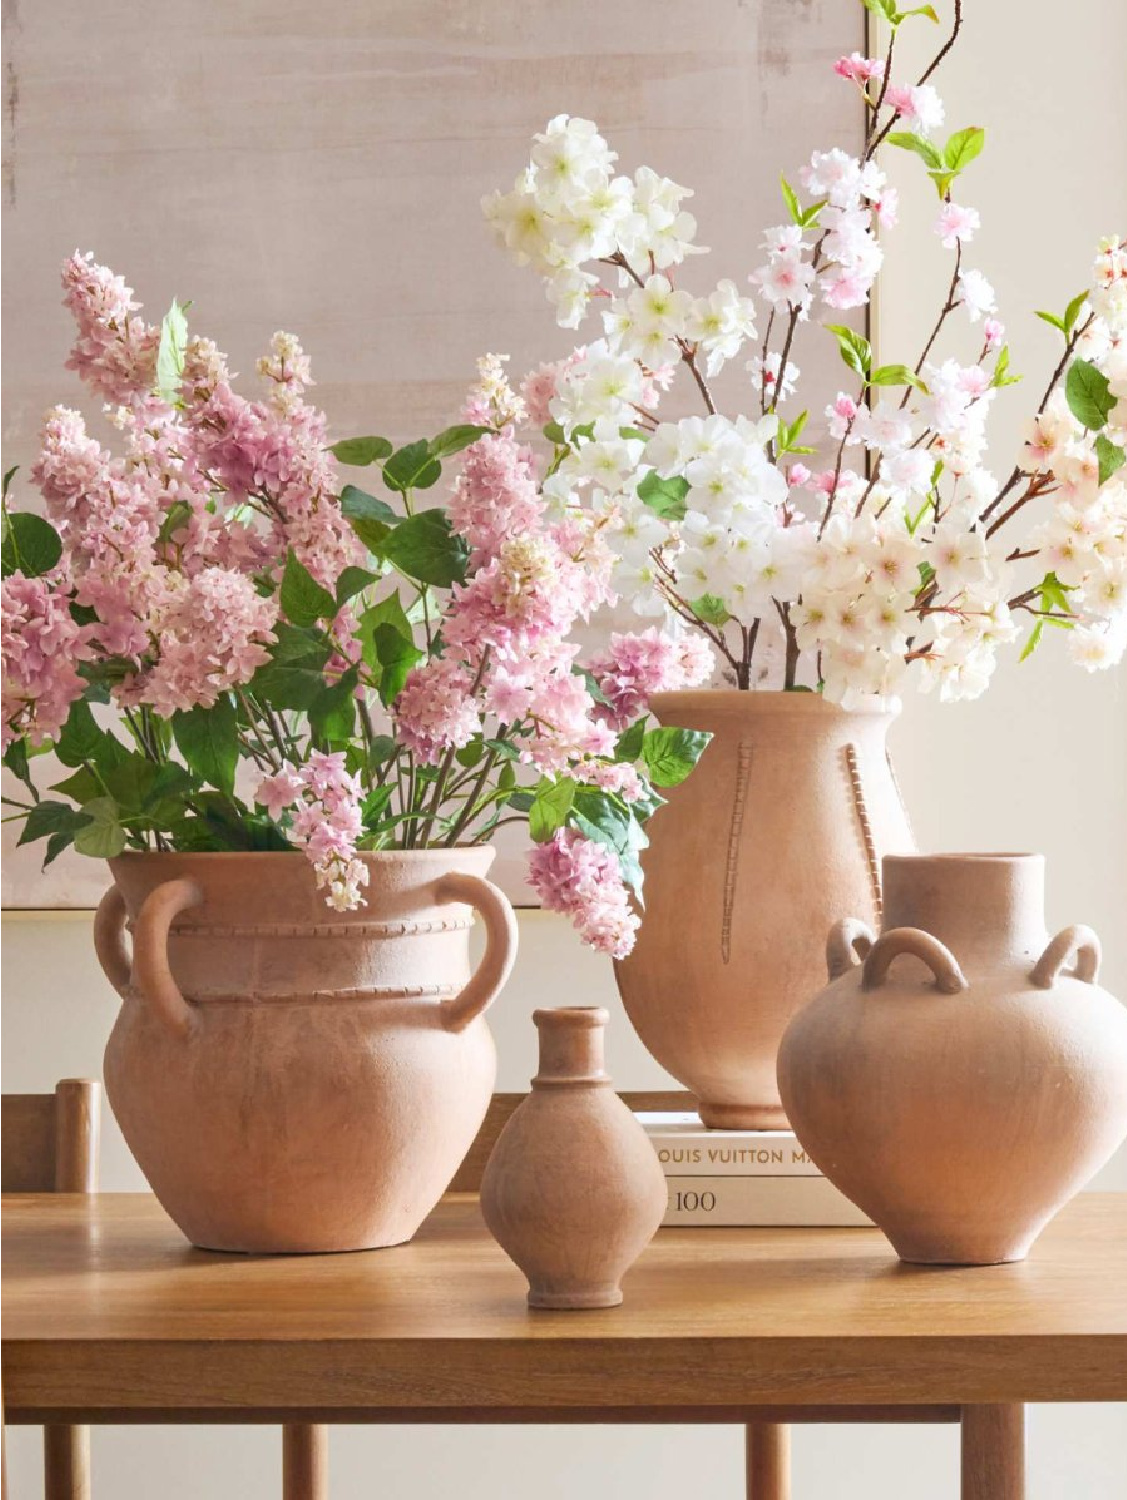 Terracotta vases and urns with pink spring flowers, Pottery Barn.